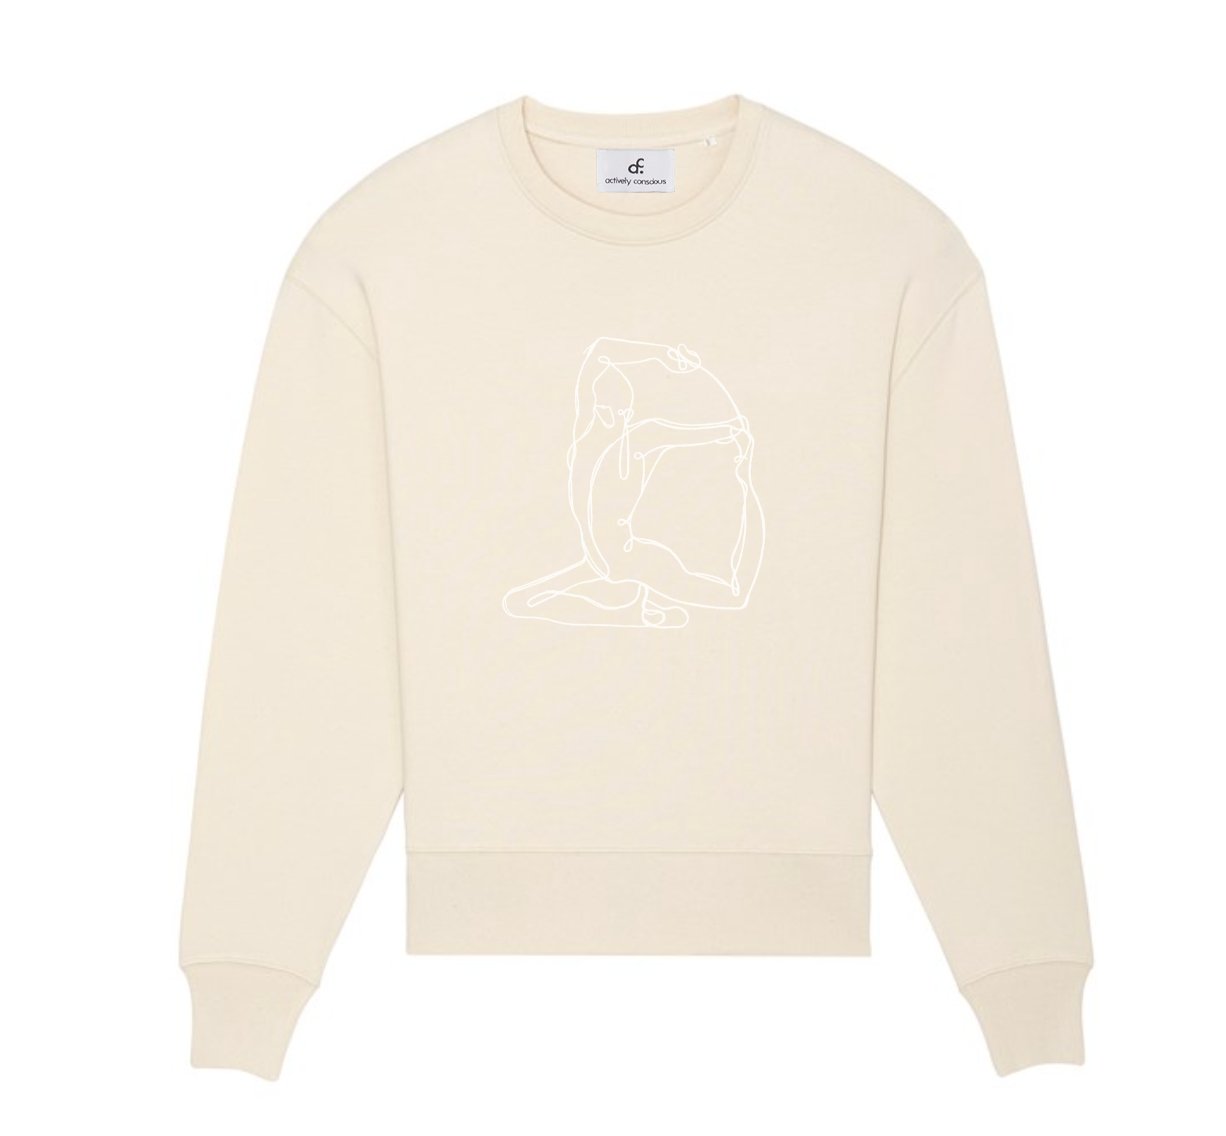 Tonal "Mermaid" Yoga Pose Embroidered Ecru Sweater - Actively Conscious